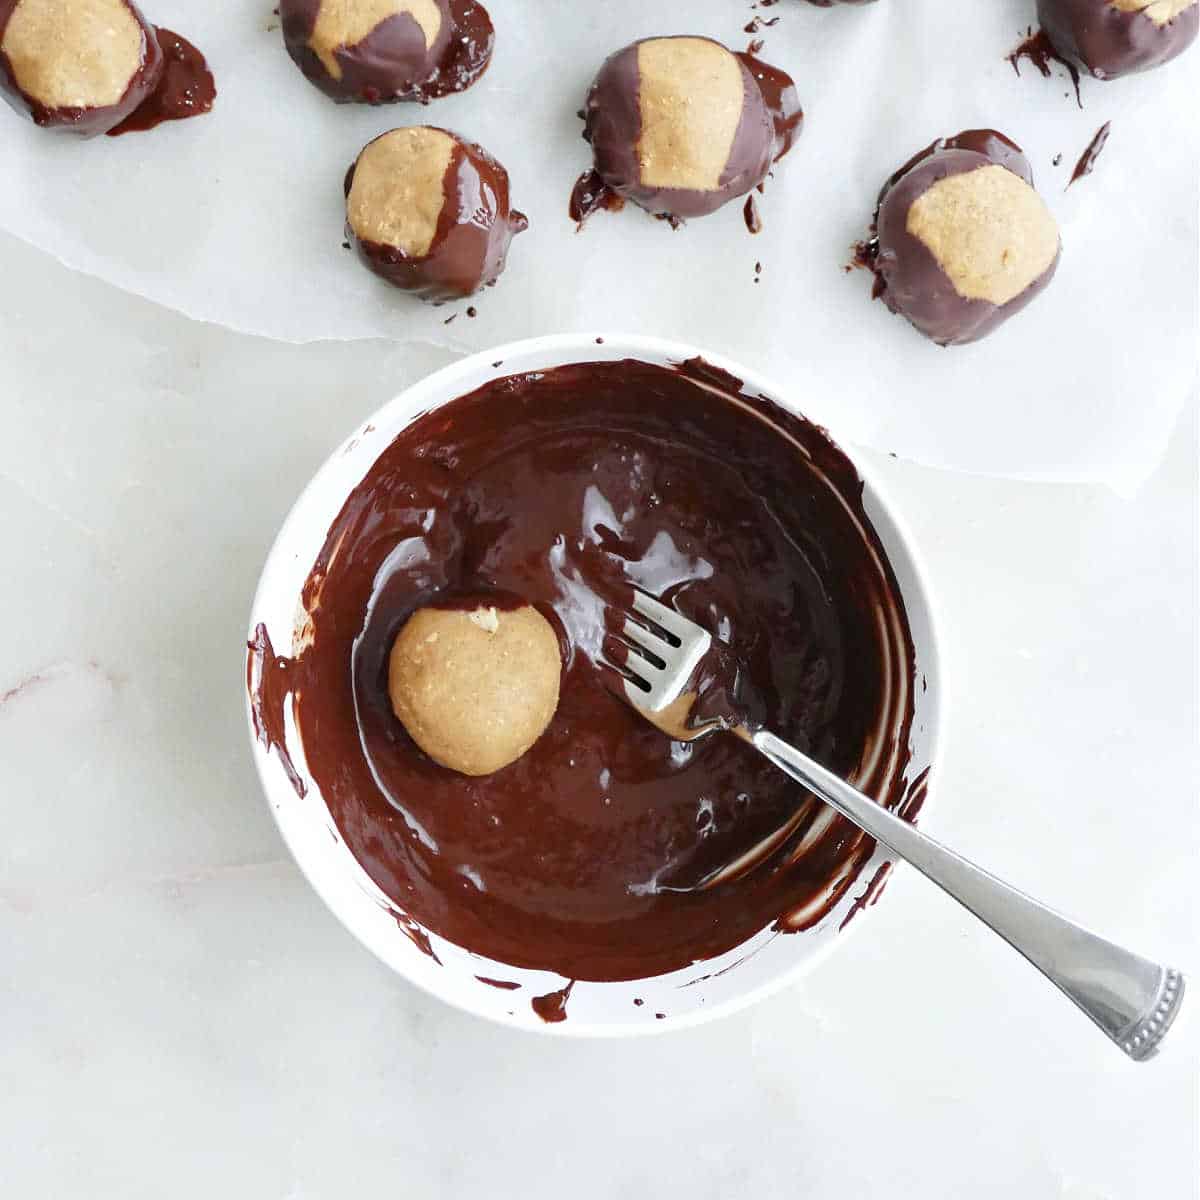 buckeye ball being dipped in a bowl of melted chocolate with a fork